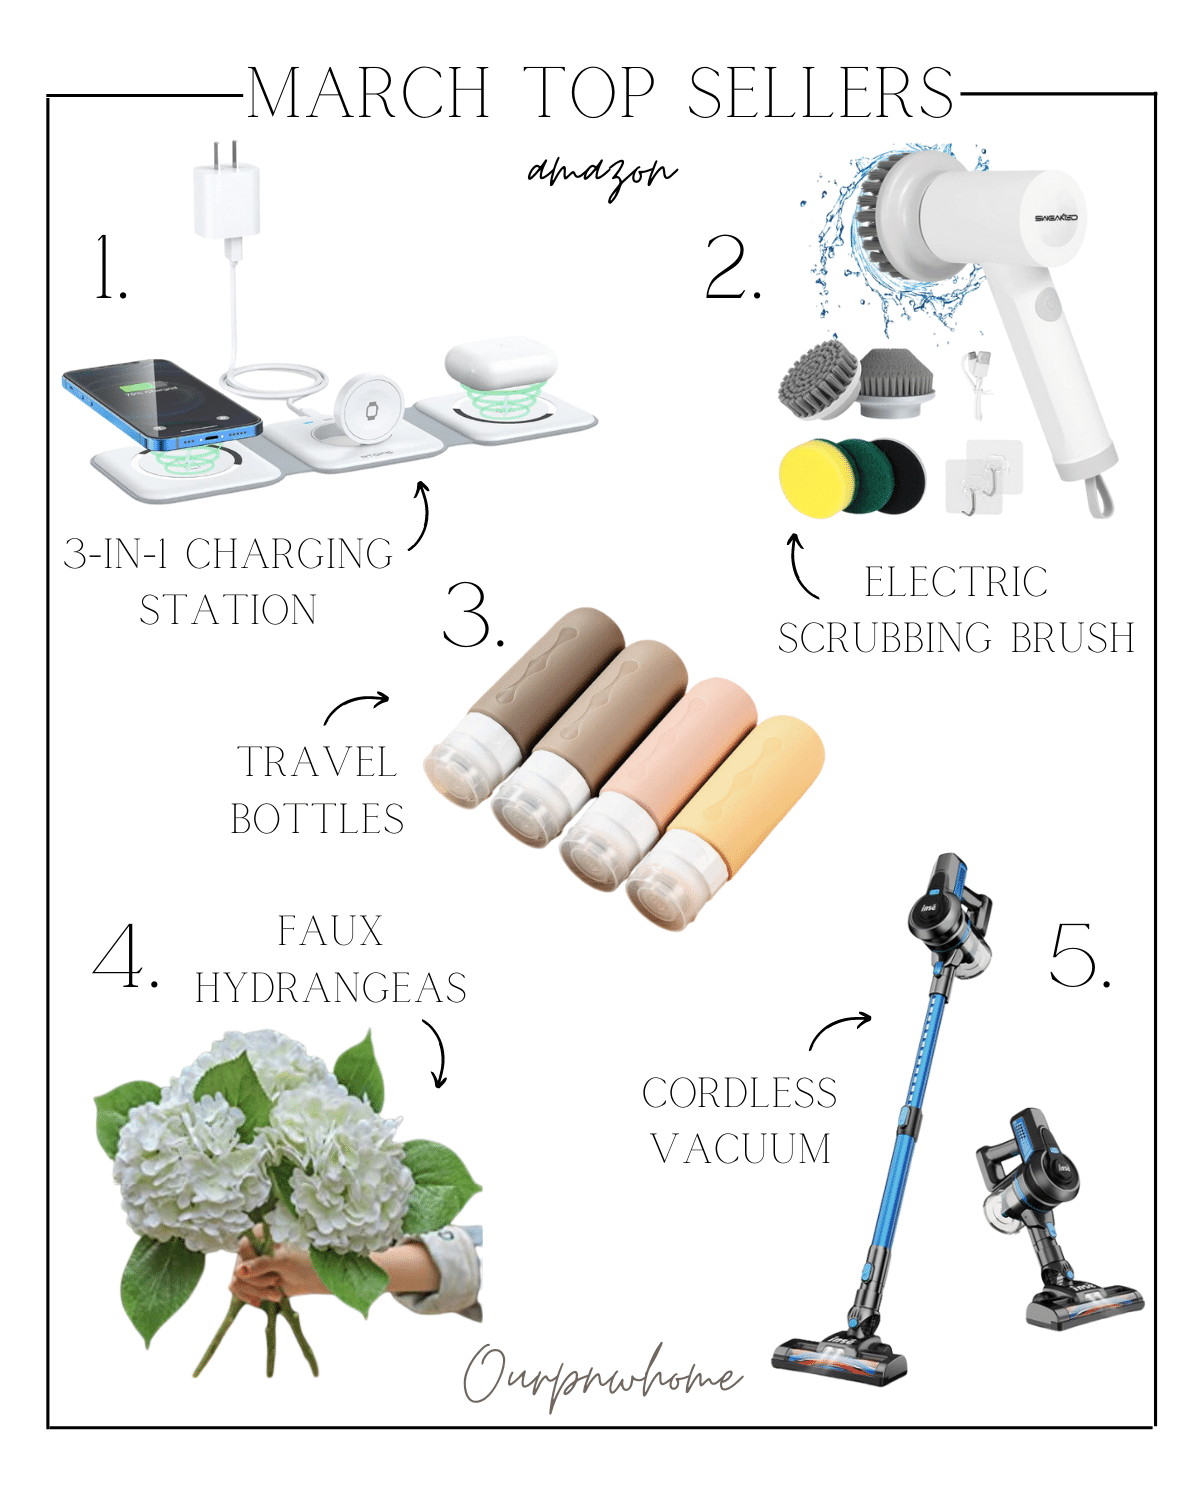 march top sellers, amazon, top 5 items, travel gadgets, charger, scrubbing brush, travel bottles, faux florals, cordless vacuum, amazon home finds 